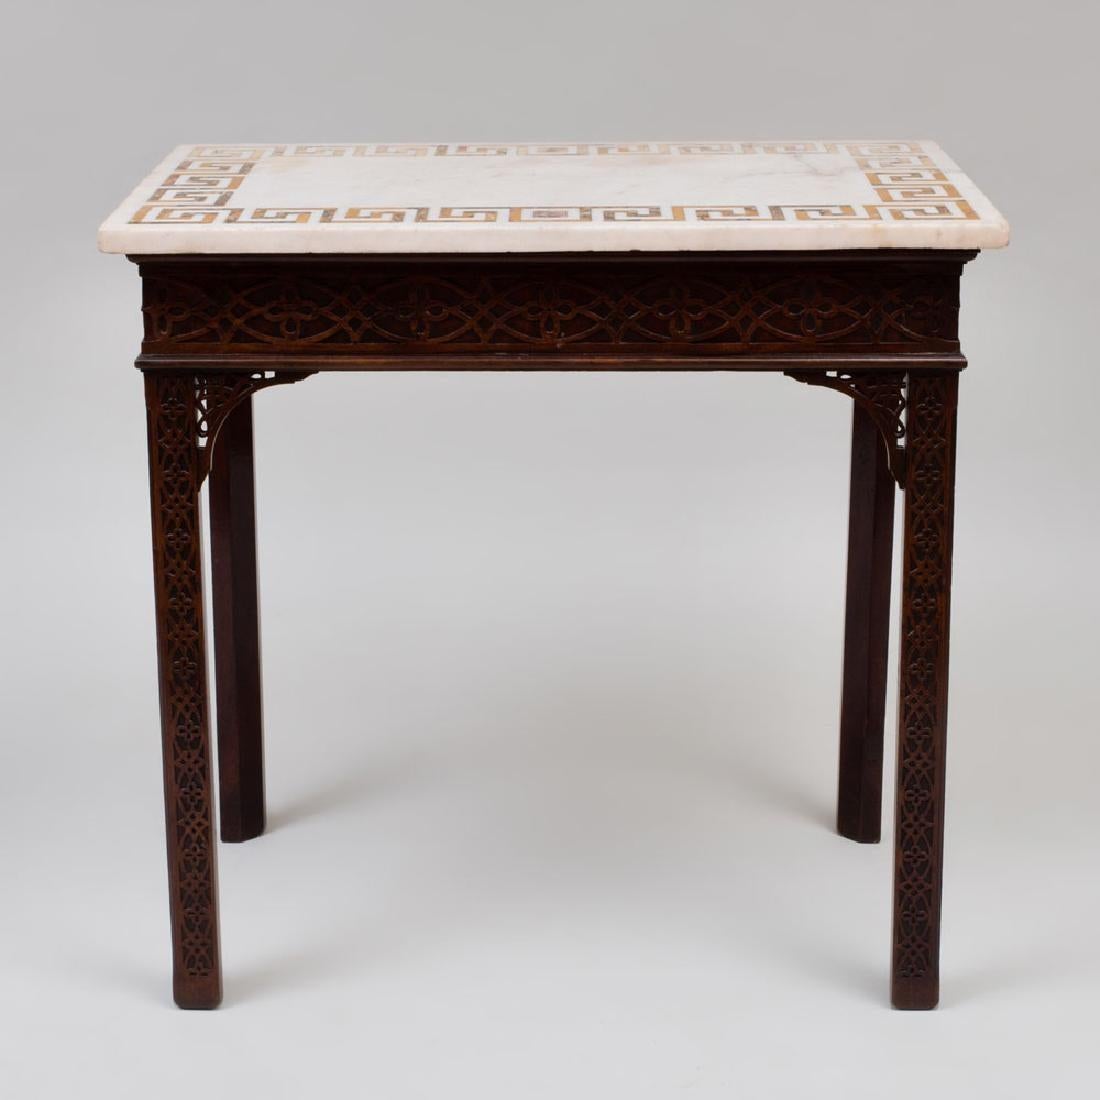 George III period mahogany fratework console table with white Carrara marble top.
With inlaid Greek key in Sienna marble.